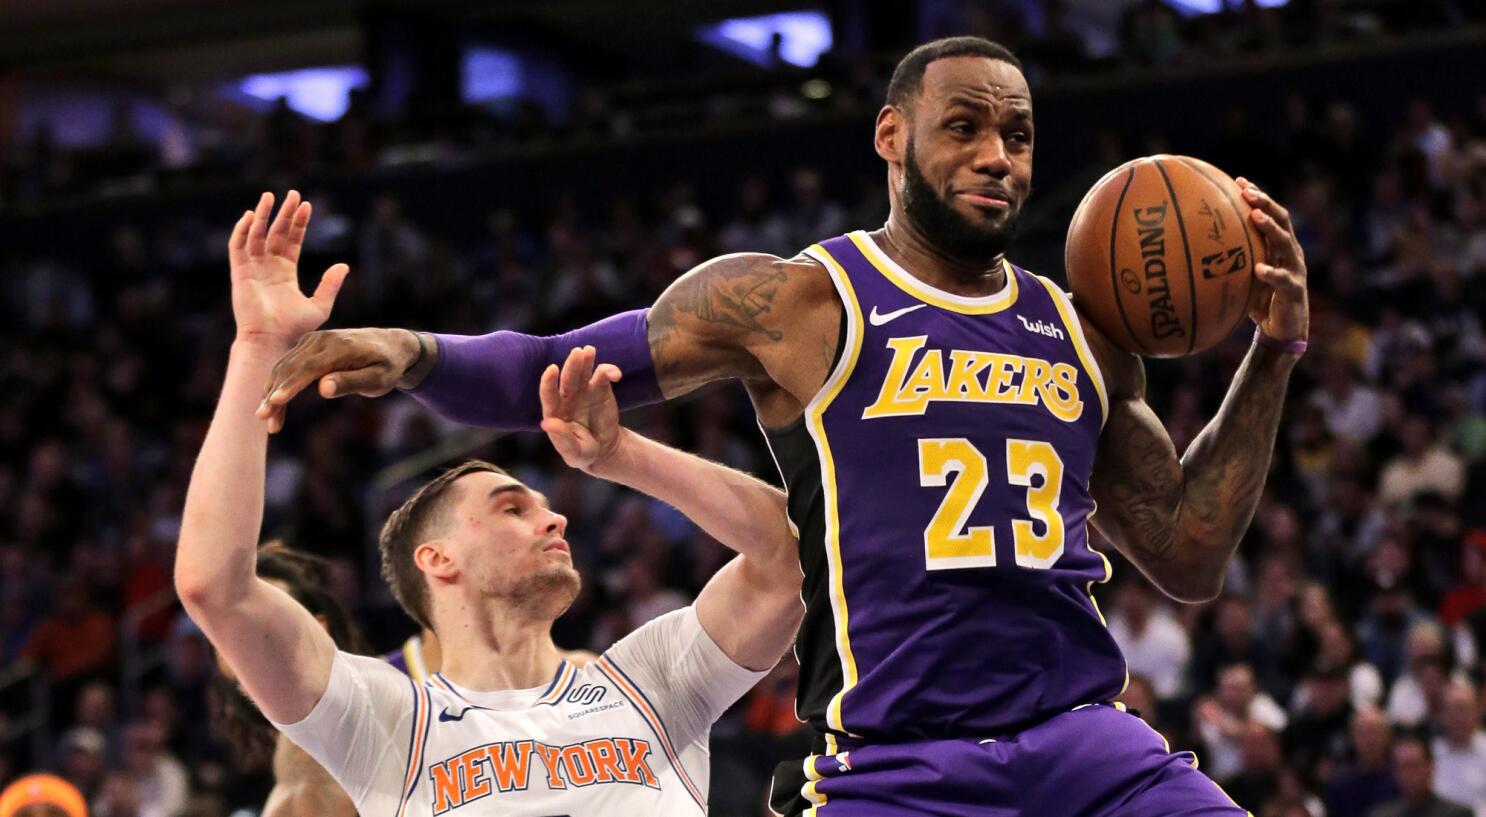 Knicks Rumors: New York would be wise to pursue LeBron James